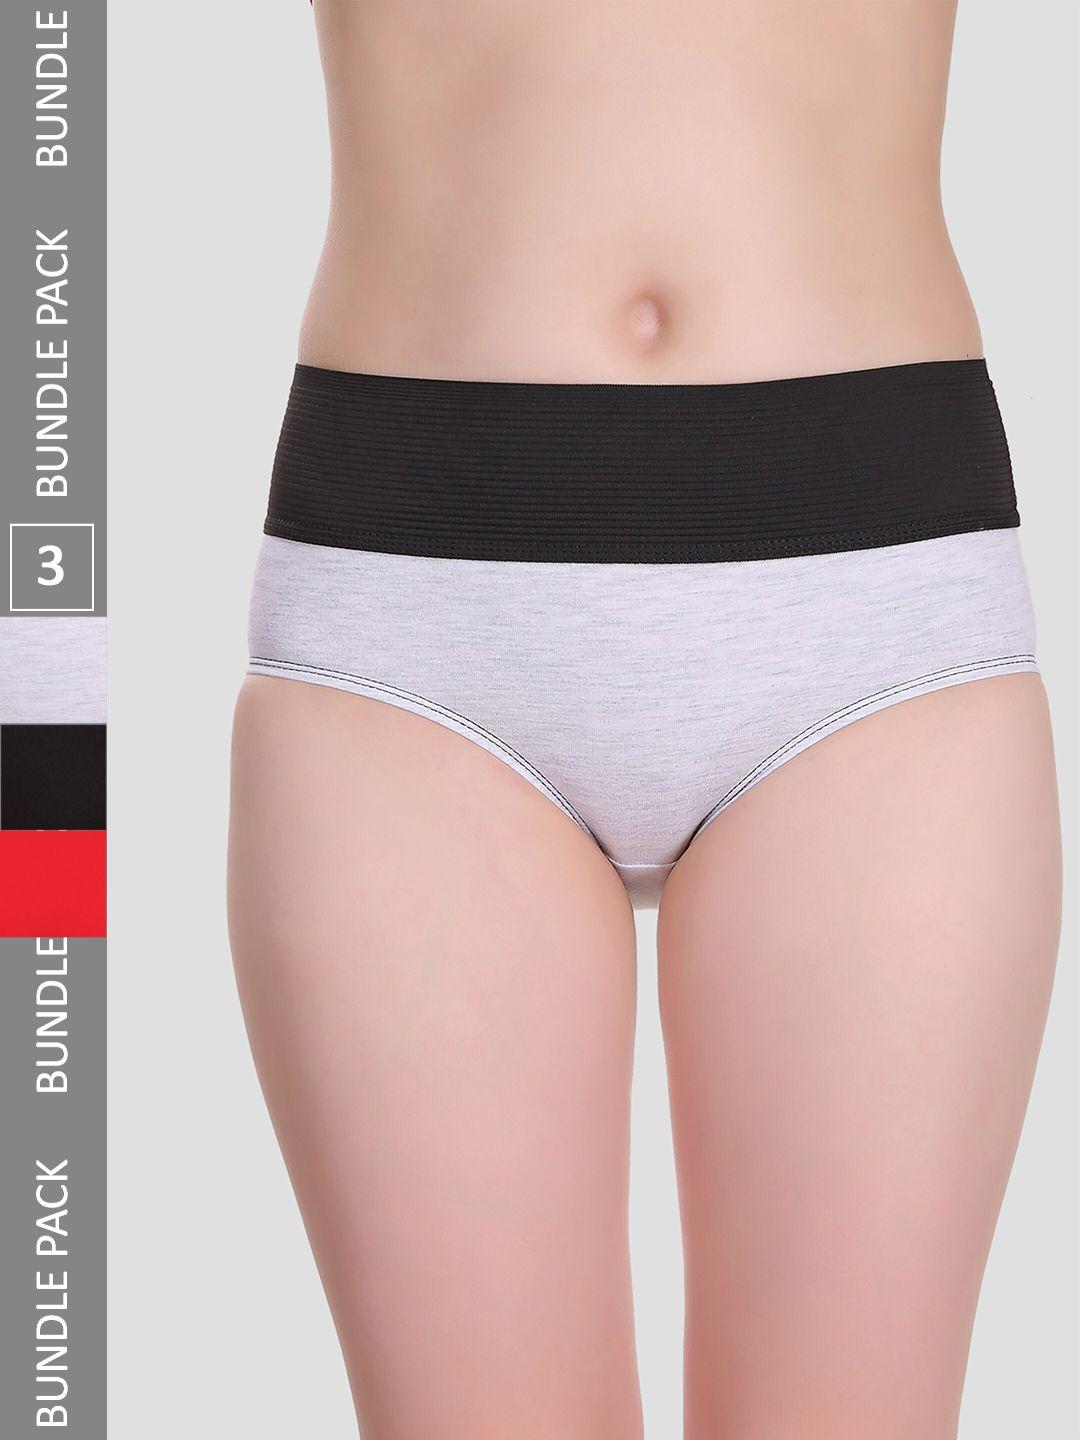 selfcare pack of 3 cotton colourblocked tummy tucker panty hipster briefs